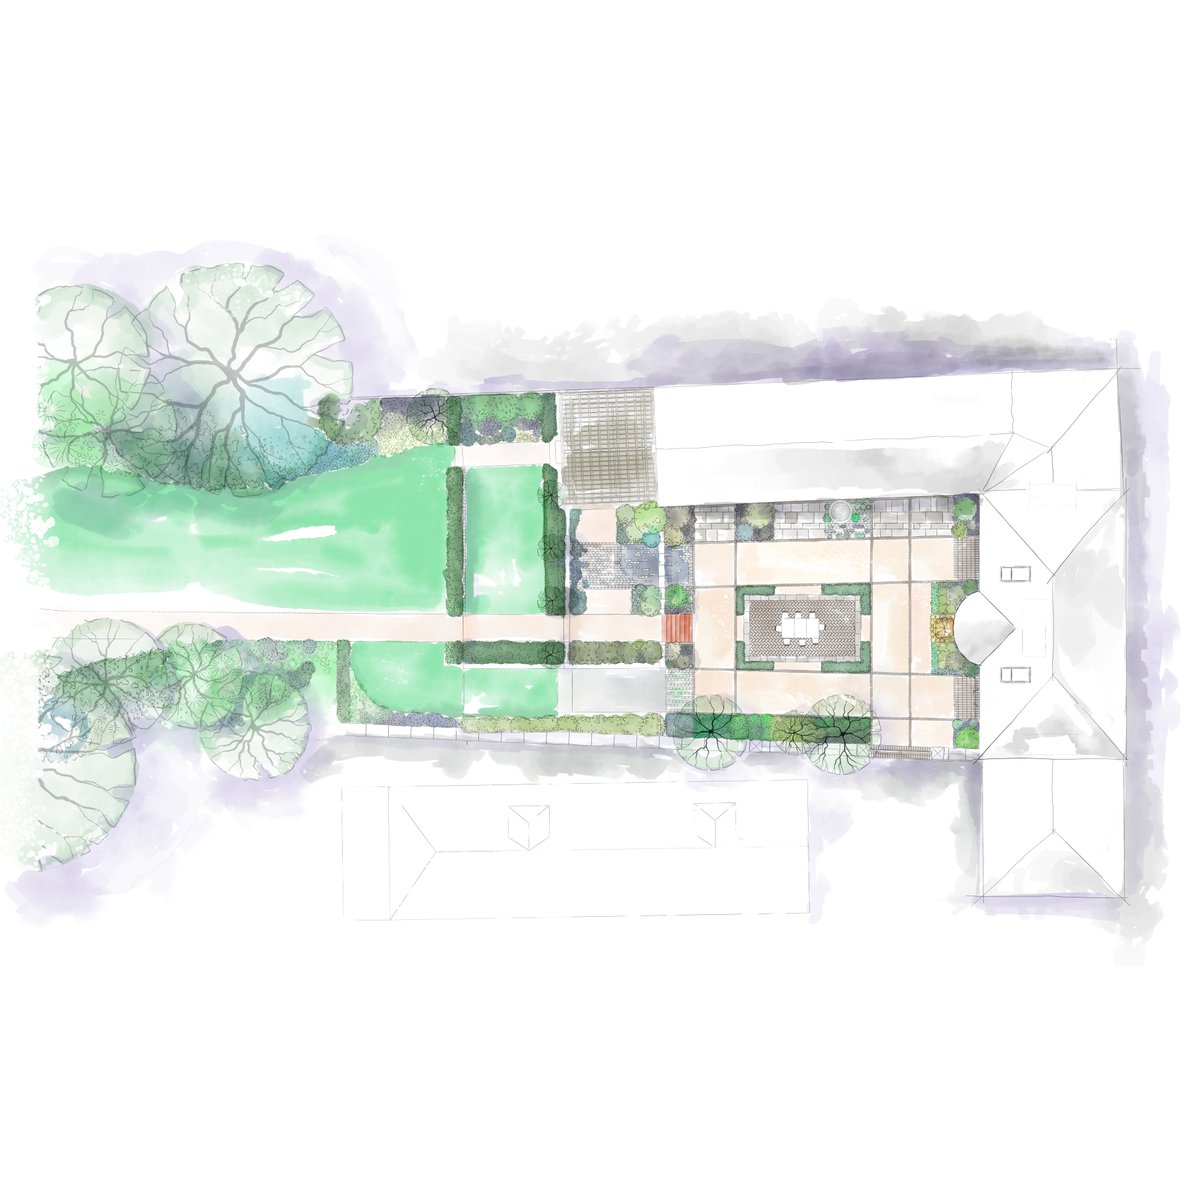 This is a birds eye view plan of one of our residential projects out in Eaglesham. 🐦️ ⁠

#GardenDesign #LandscapeDesign #gardenideas #design #architecturedesign #OutdoorSeating
#glasgow #SCOTLAND